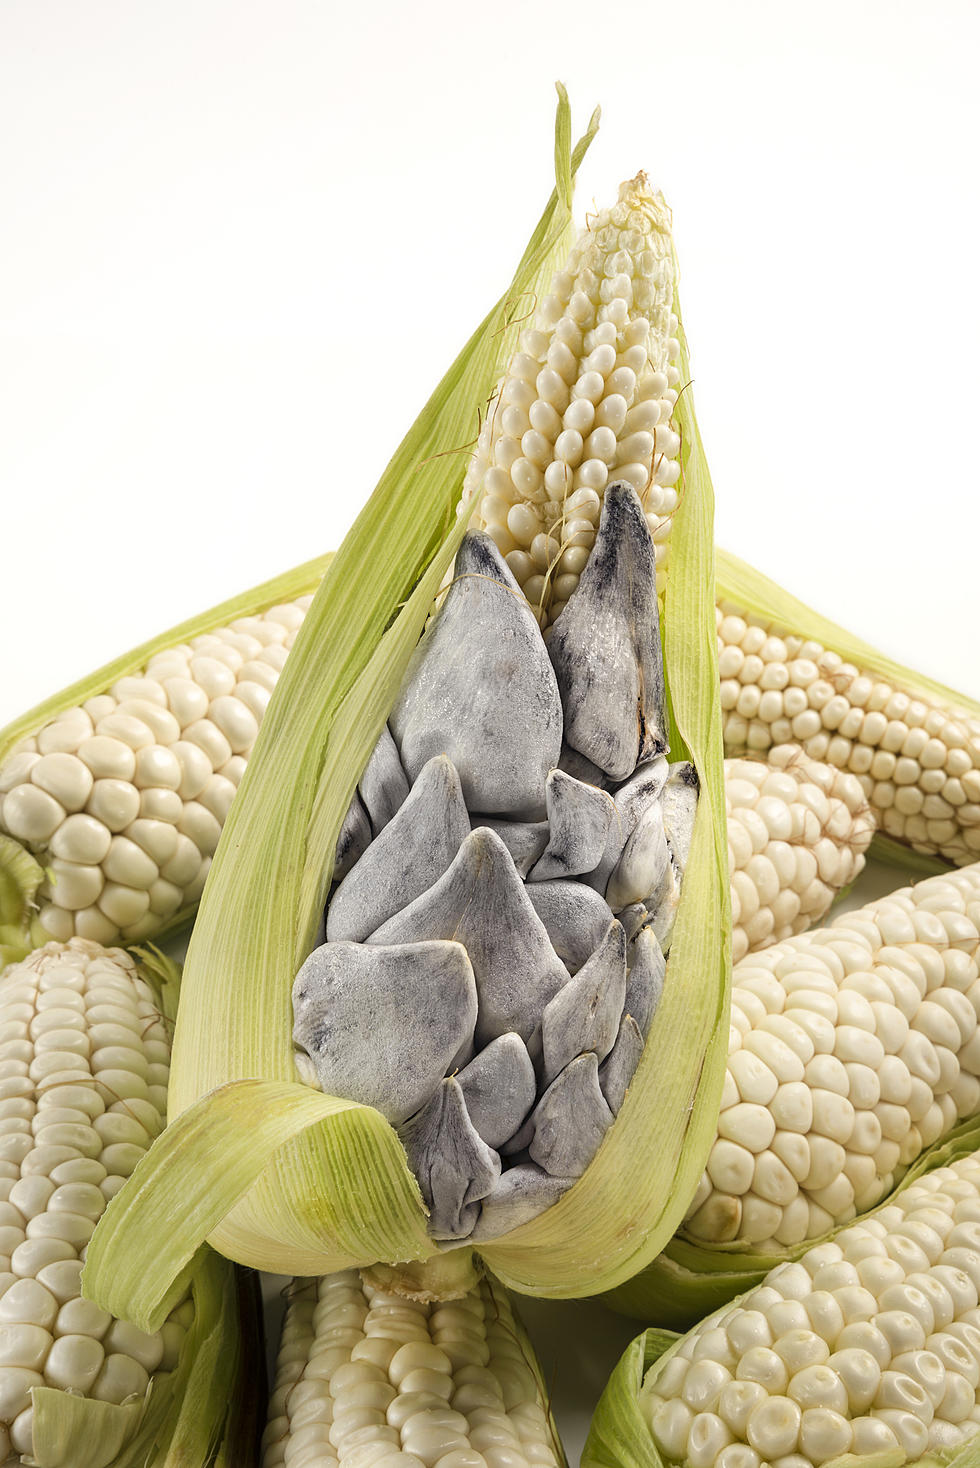 Scary Looking Ear Of Corn Is Actually A Delicacy For Some MN